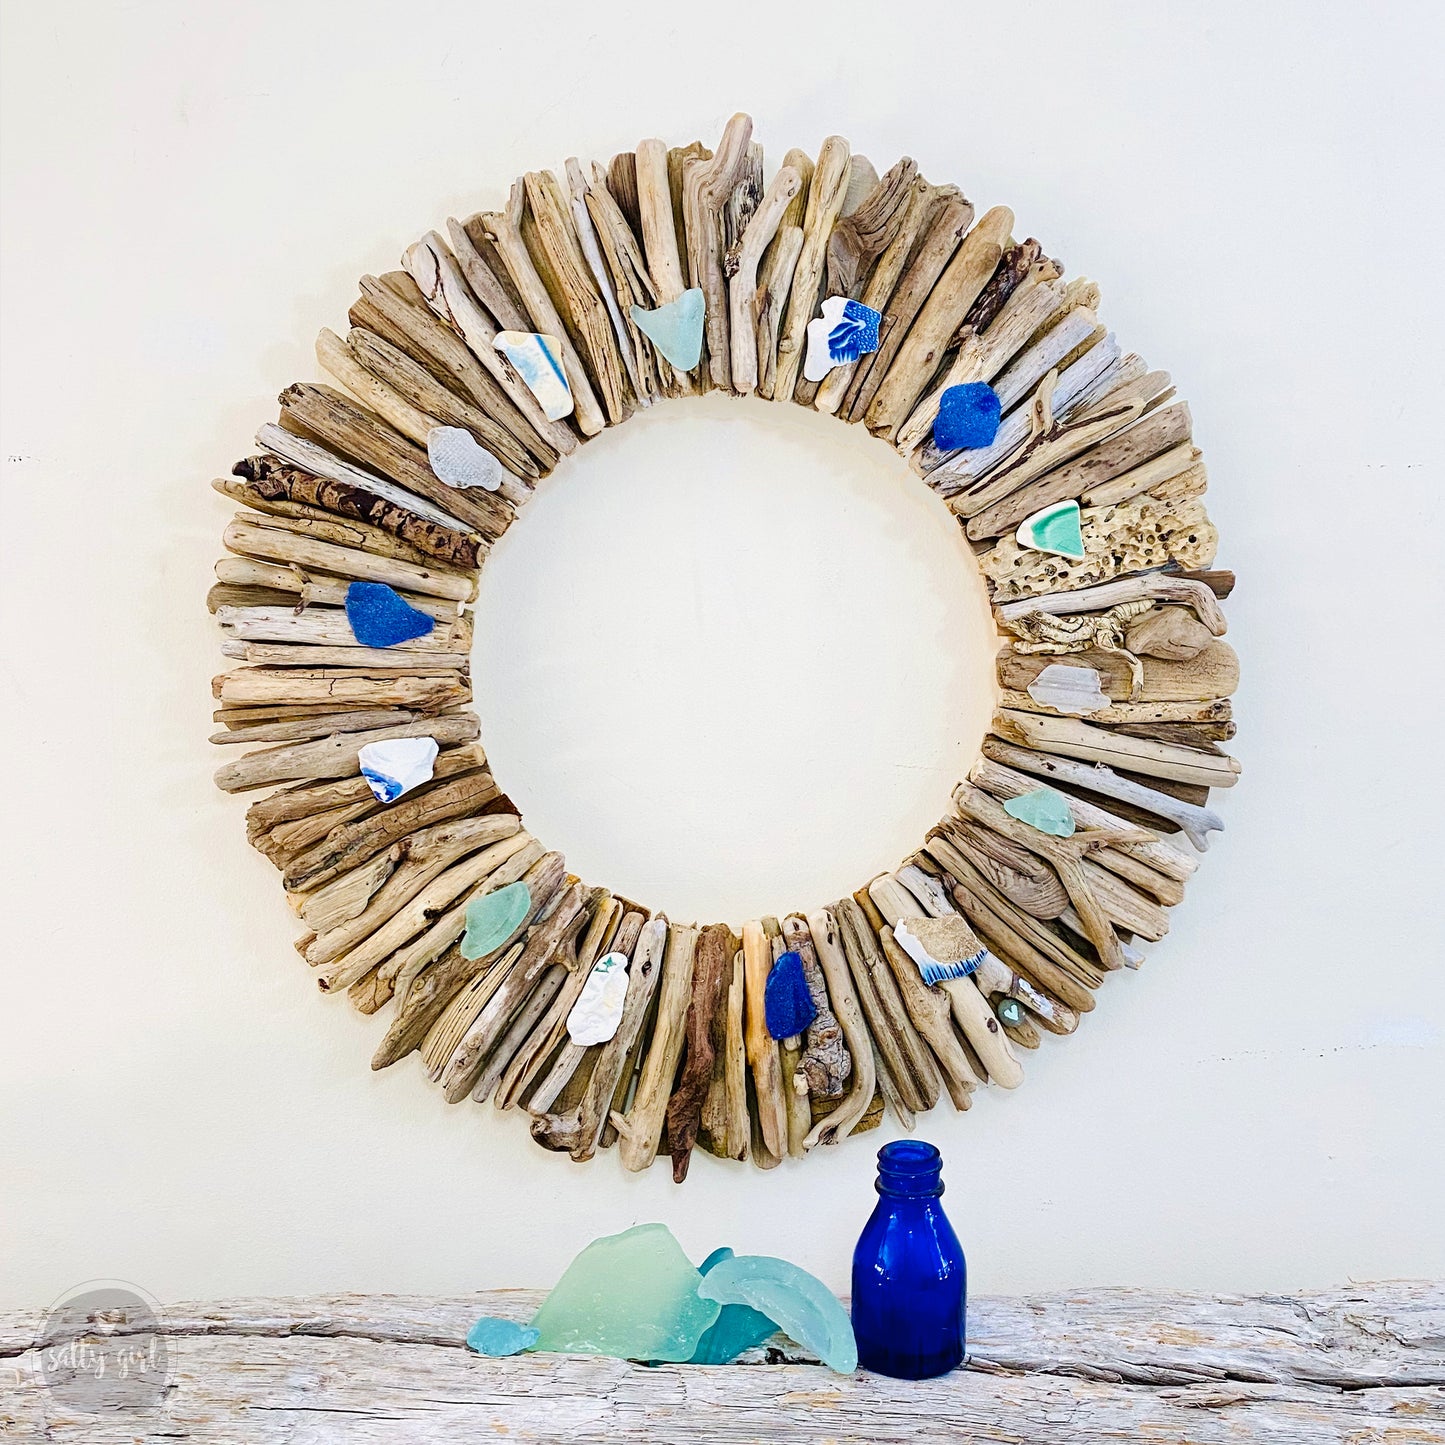 Driftwood Wreath - Boho Style with Beach Pottery and Sea Glass Accents - Sizes 12" - 16" - 20”